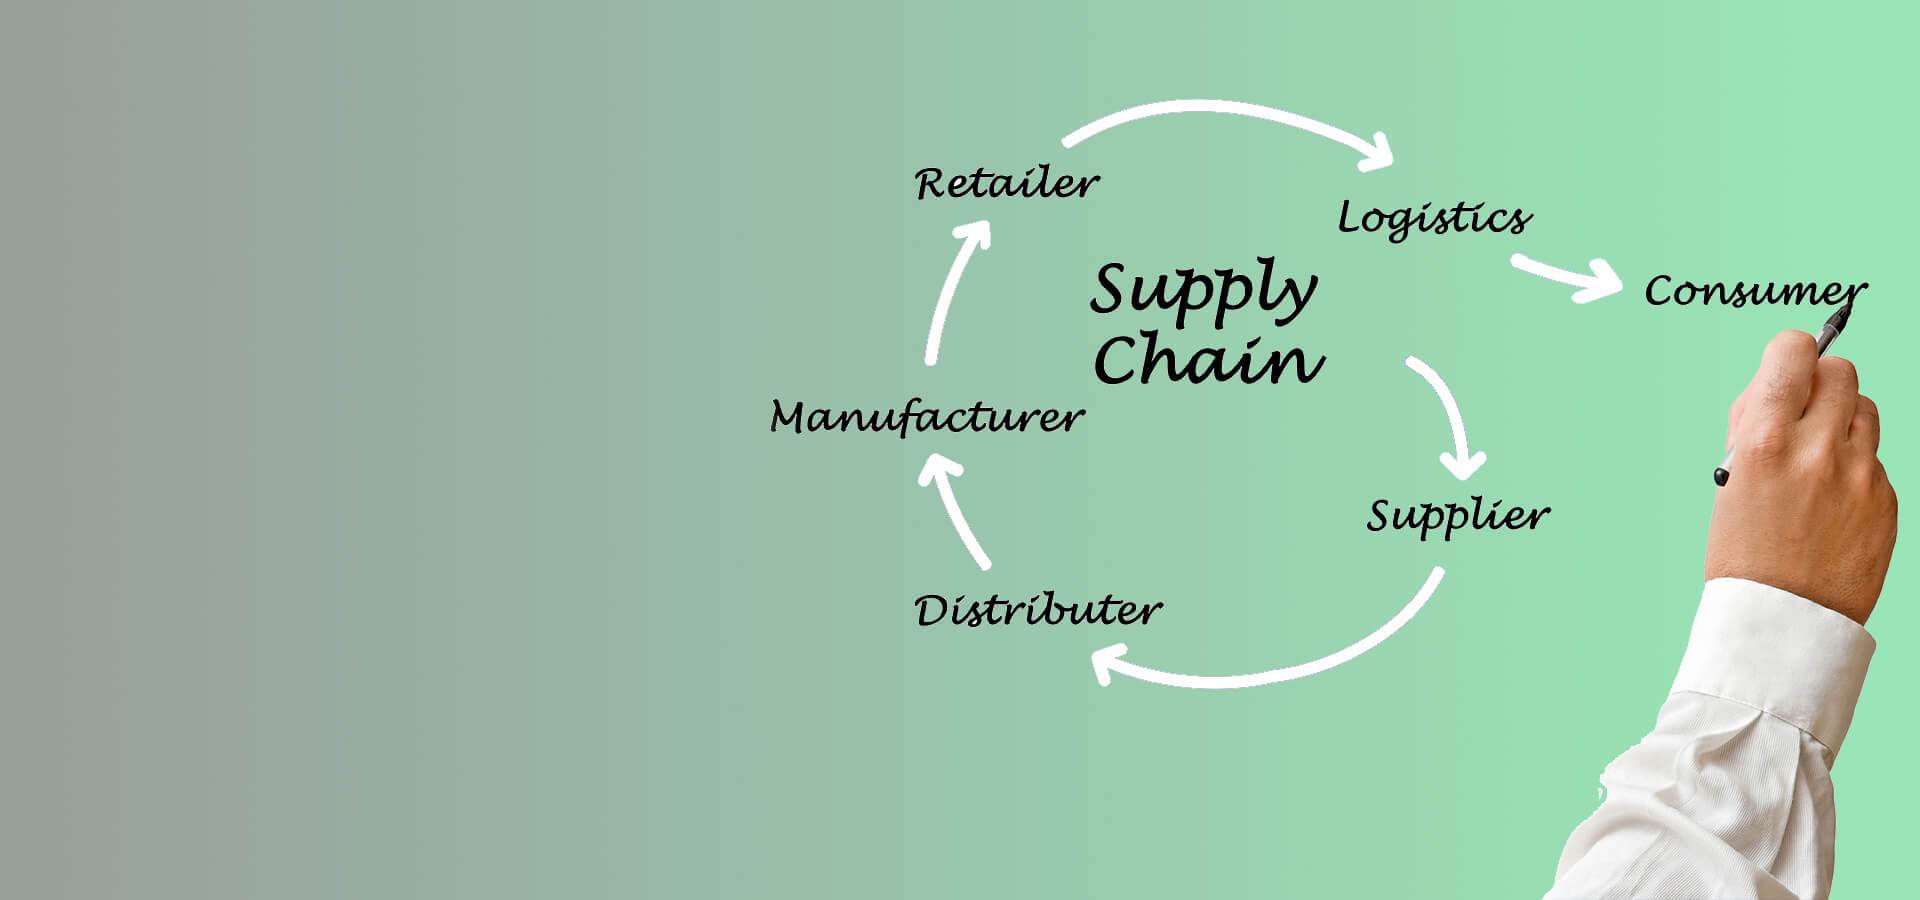 supply chain management system software